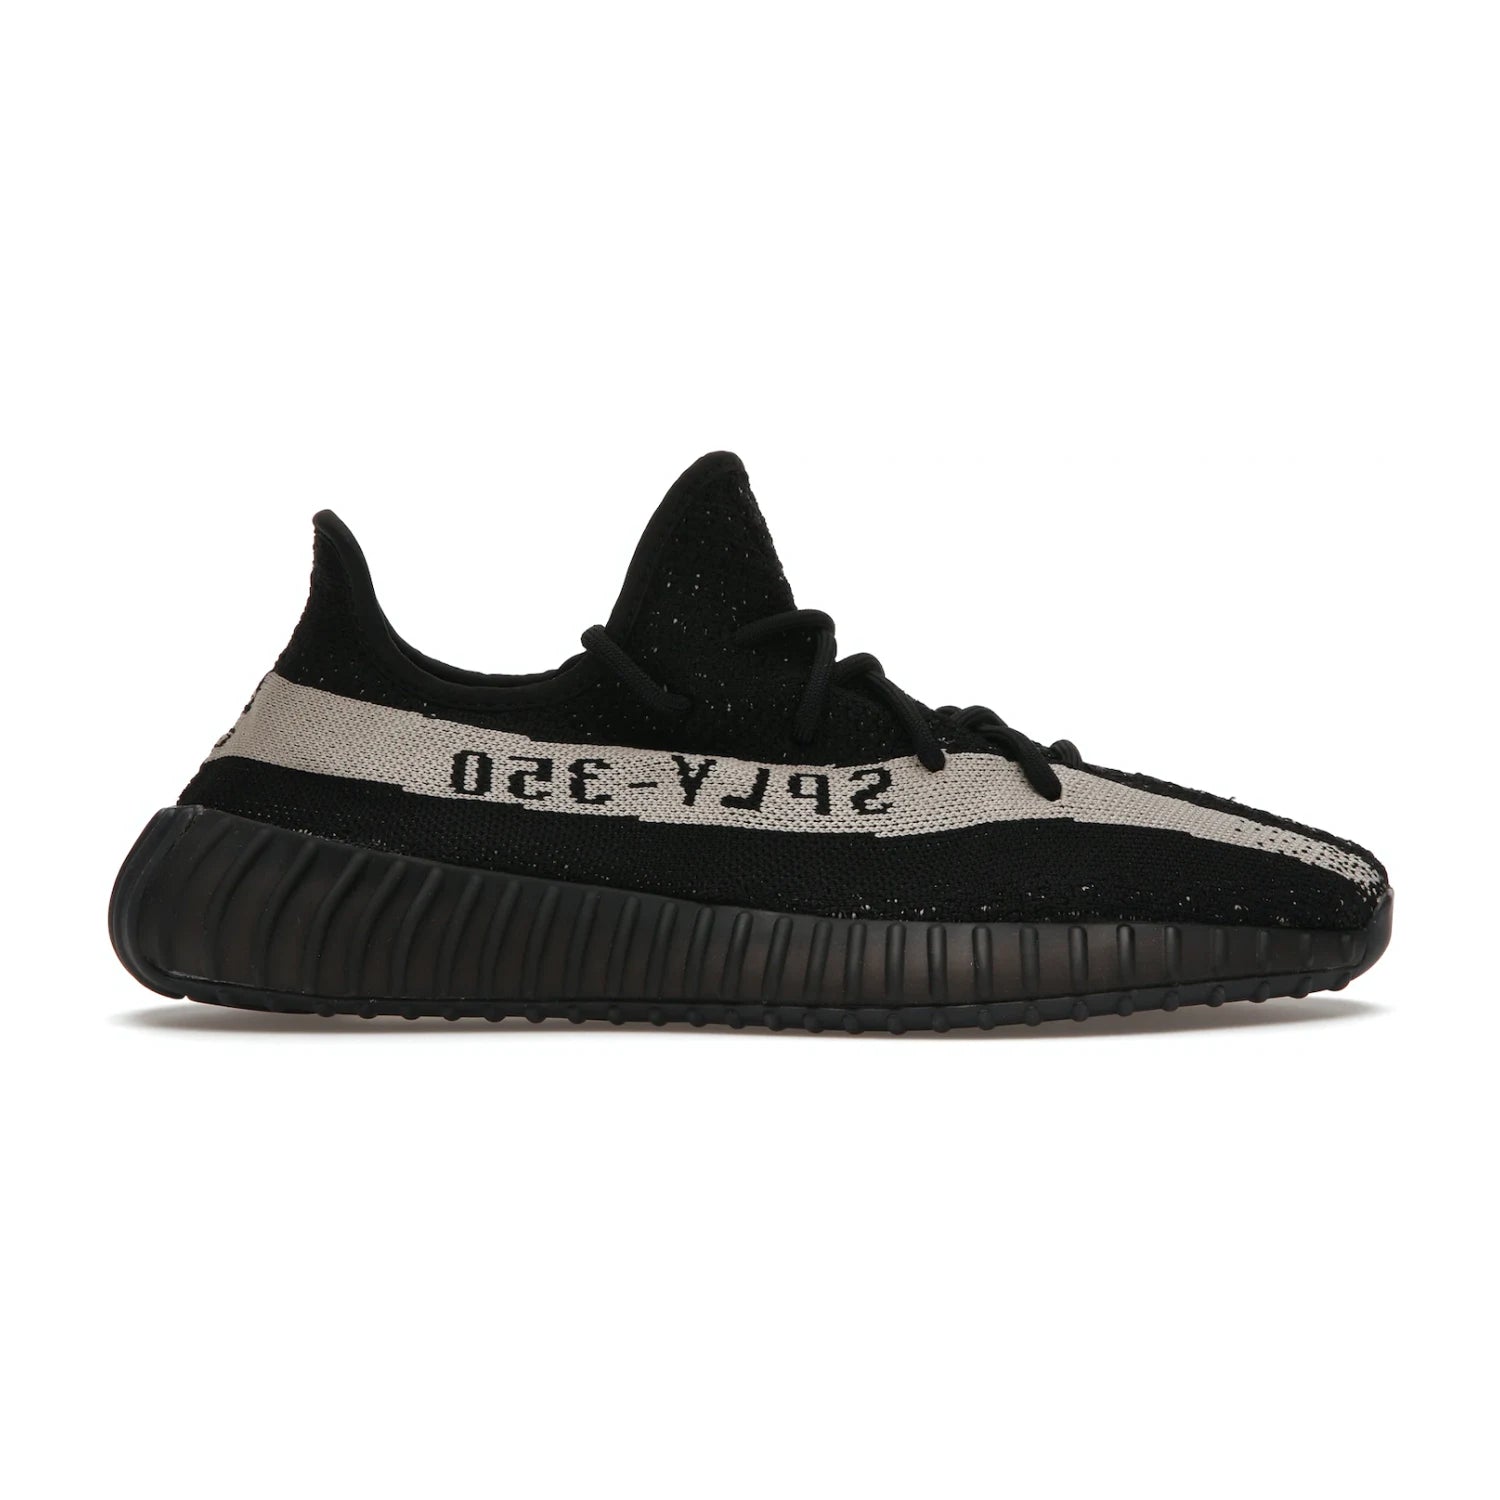 Buy The adidas Yeezy Boost 350 V2 Black Non Reflective Right Here